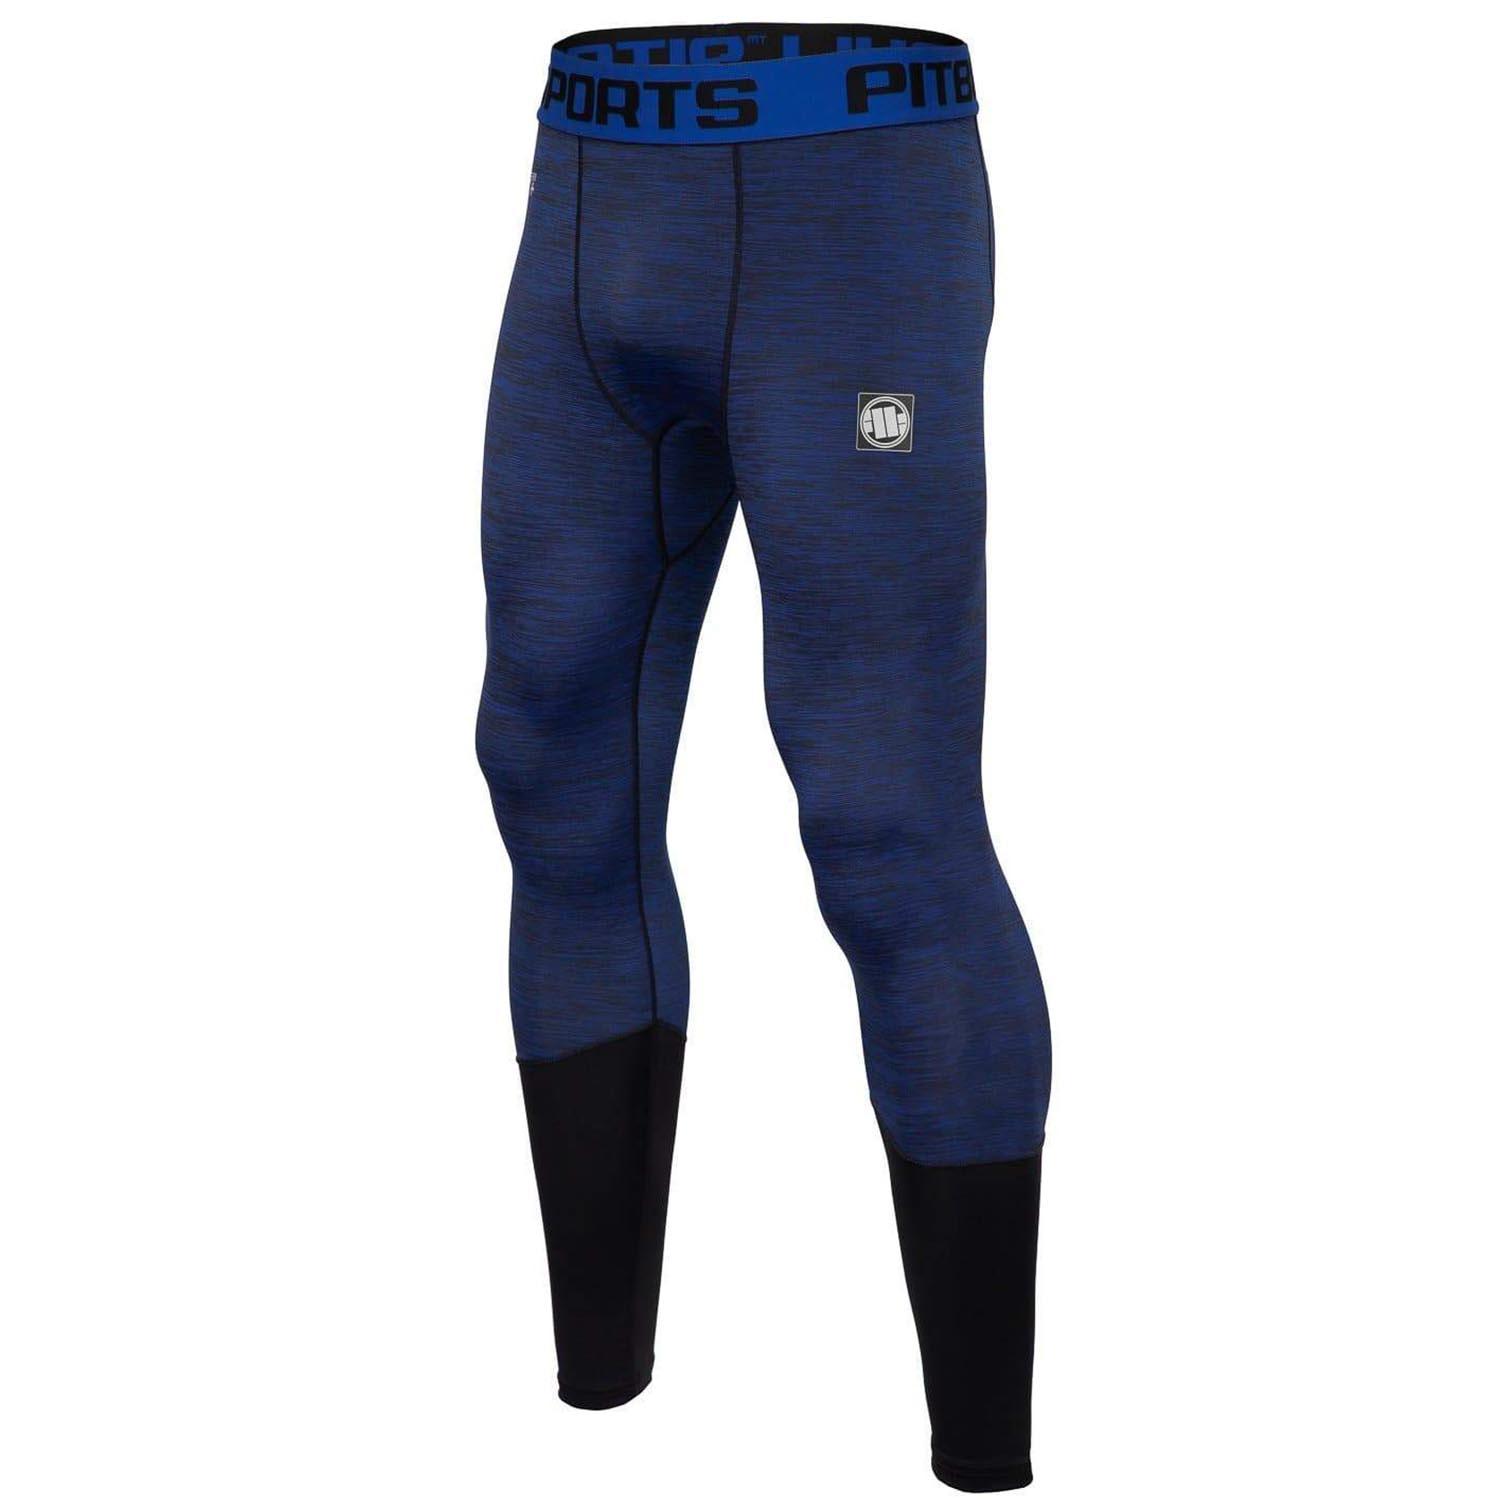 Pit Bull West Coast Compression Pants, Performance, Small Logo, navy